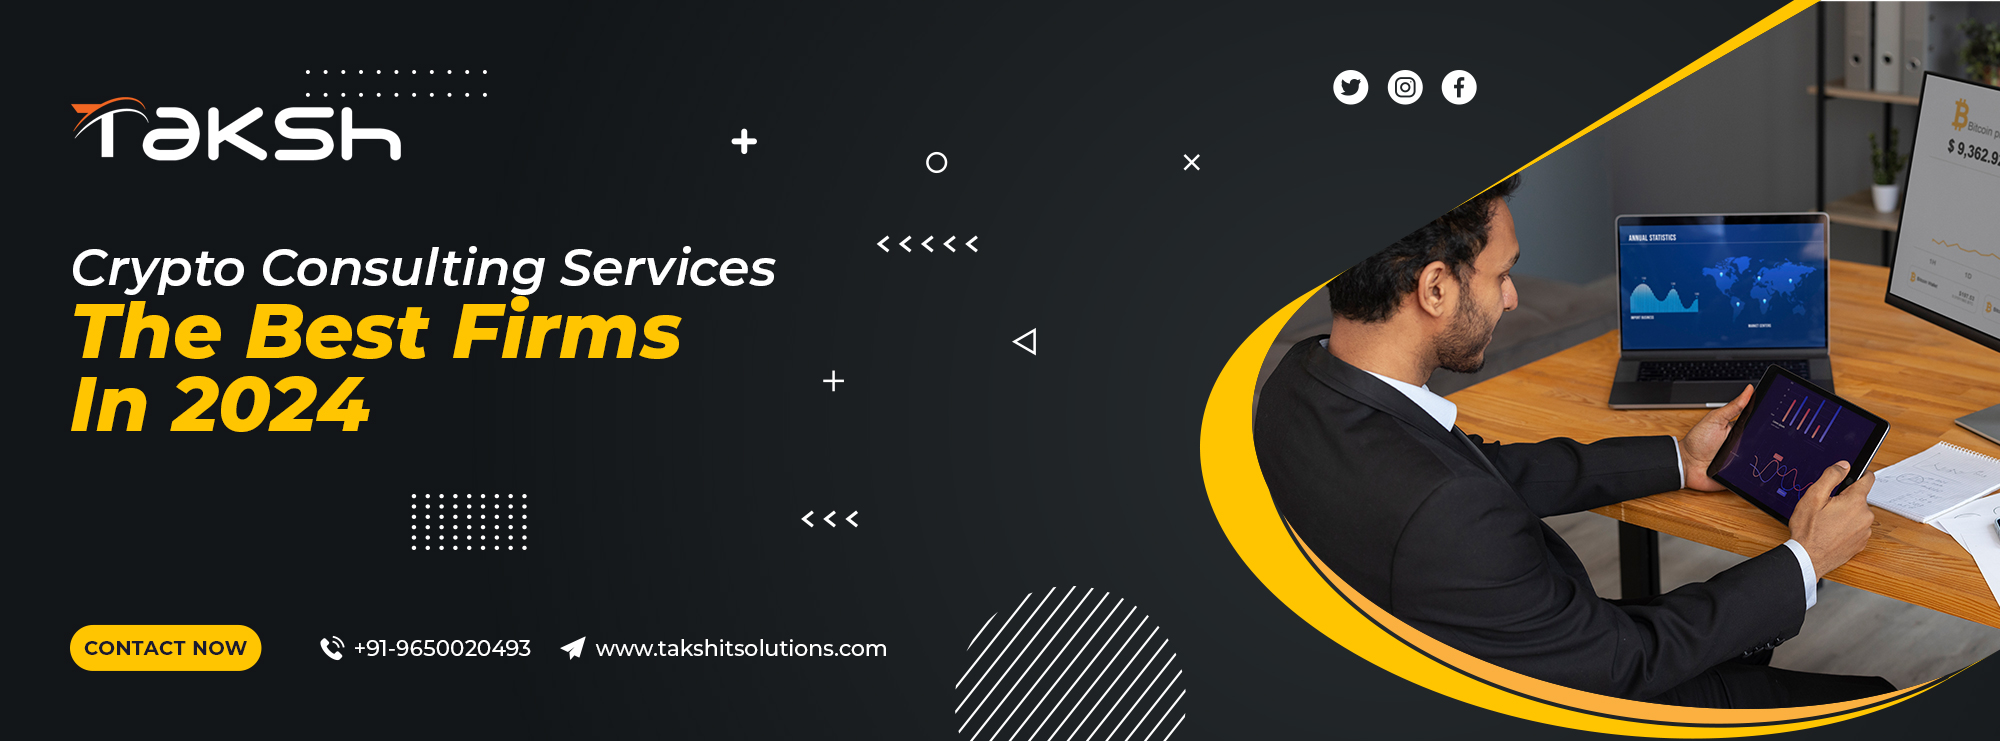 Crypto Consulting Services: The Best Firms In 2024 || Taksh IT Solutions Private Limited